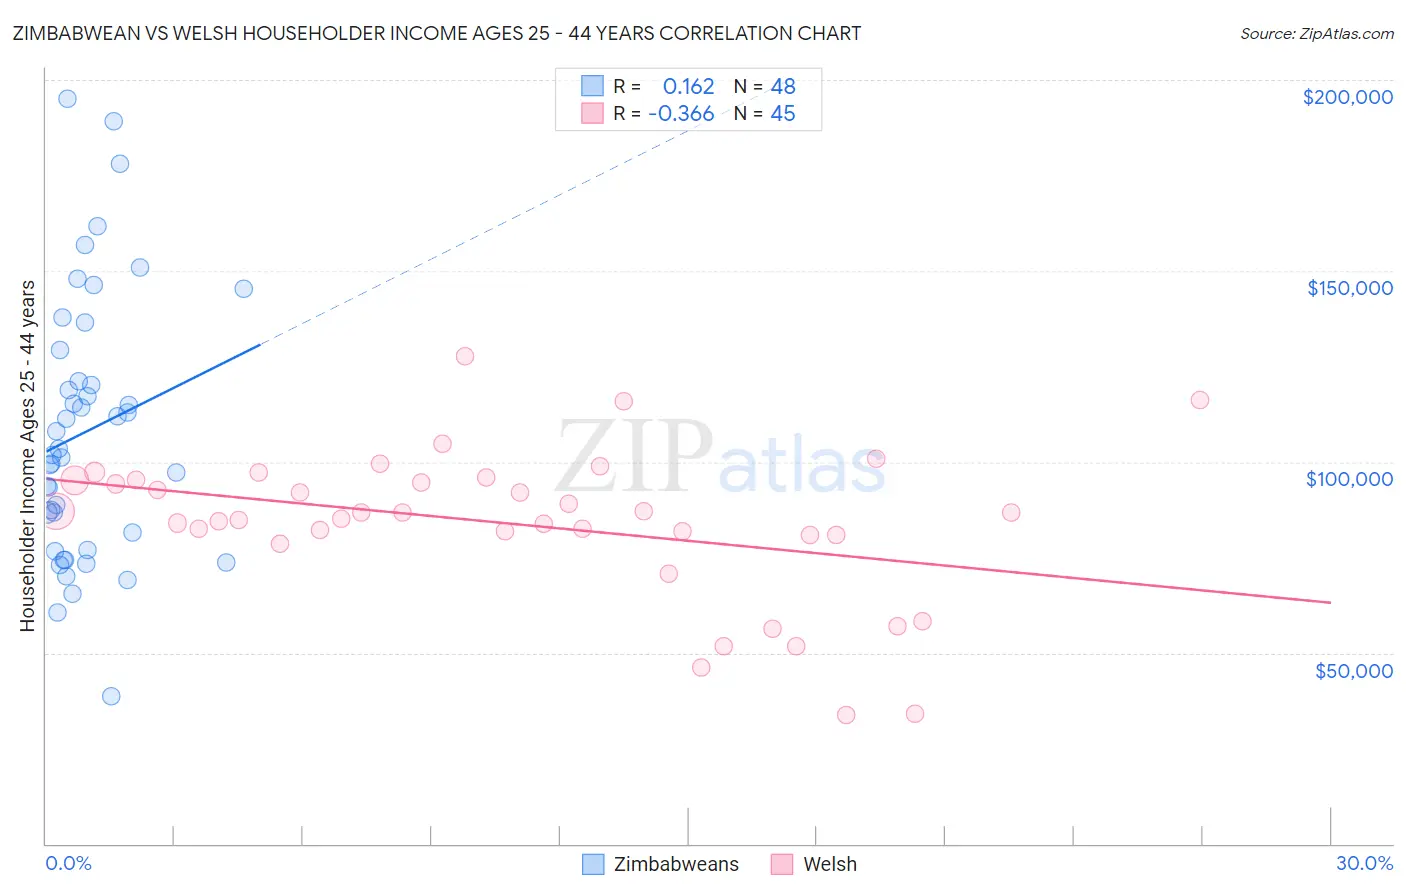 Zimbabwean vs Welsh Householder Income Ages 25 - 44 years